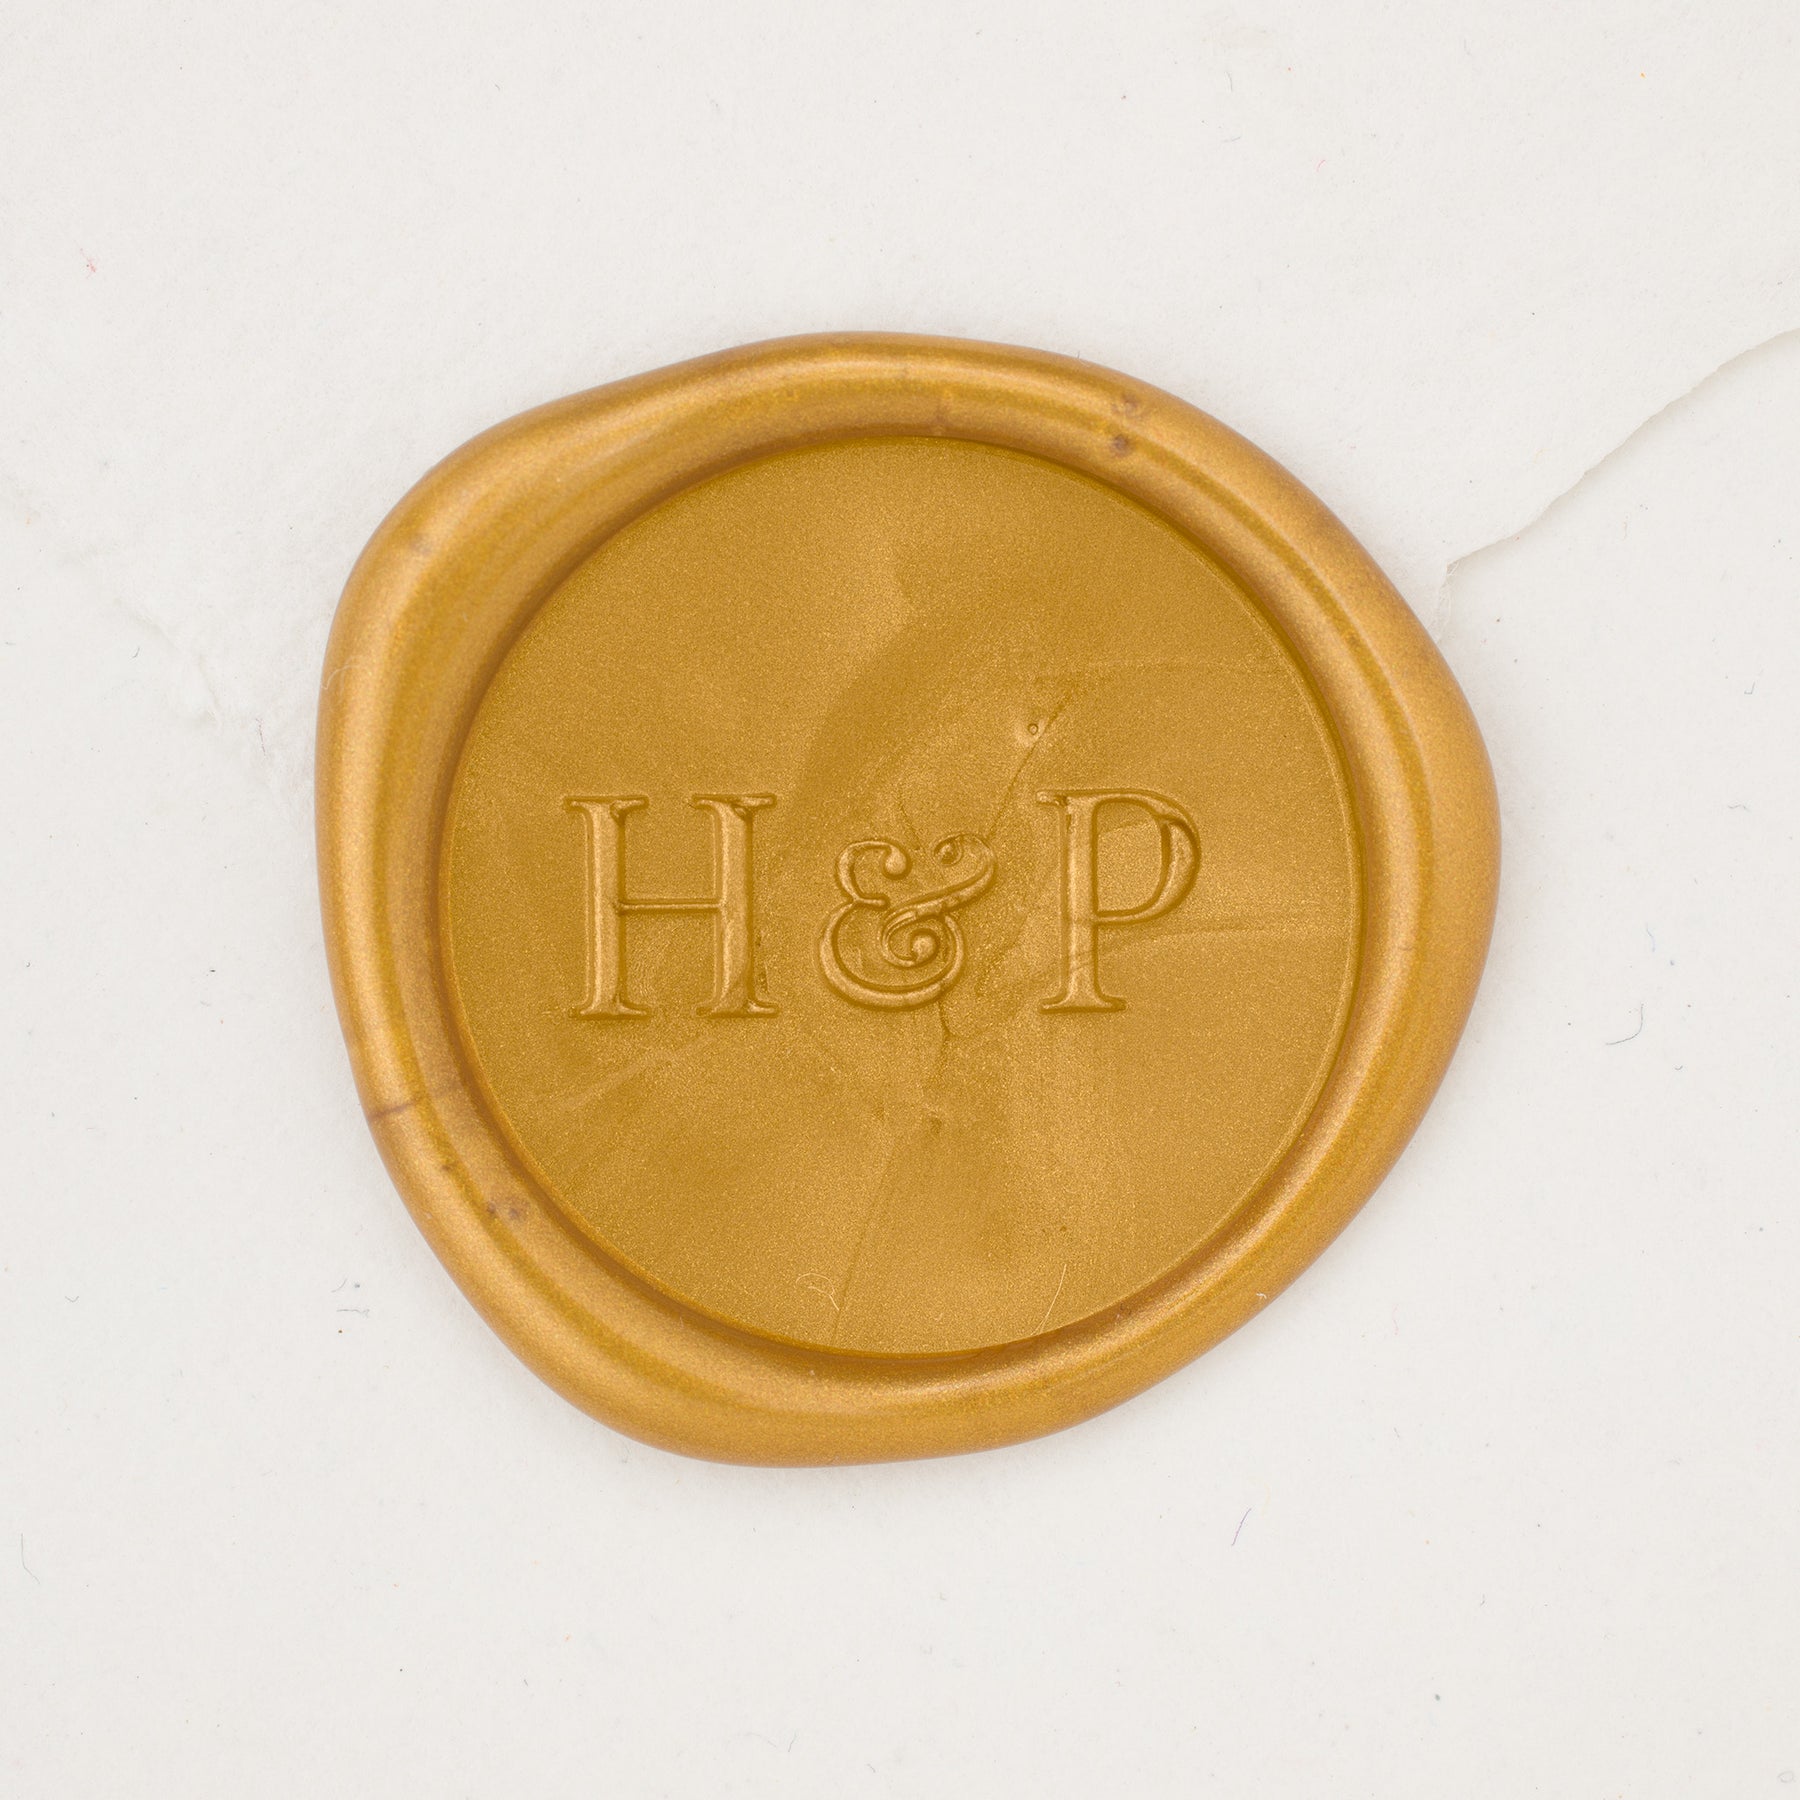 Personalized Wax Seals Stamps  Custom Initials, Monogram, Square, and Oval  Wax Seals